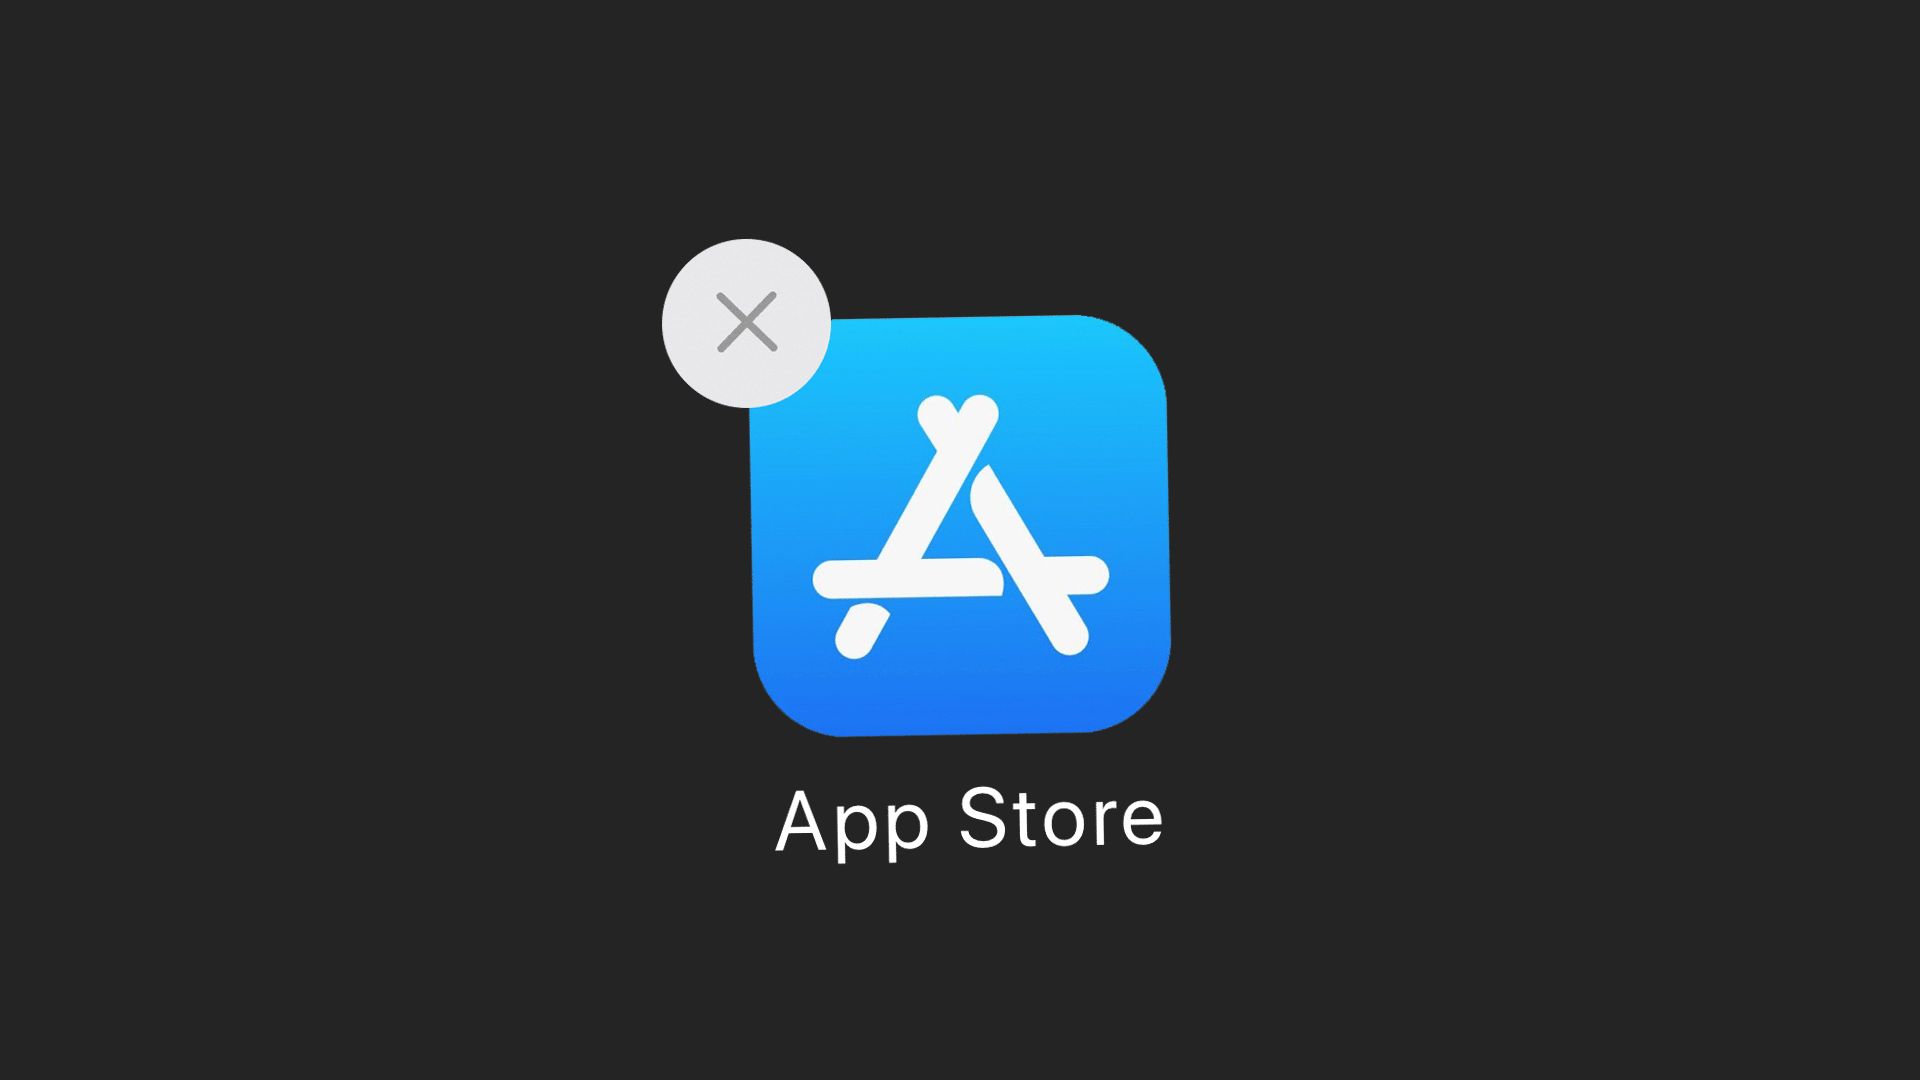 Illustration of an App Store App icon about to be deleted.